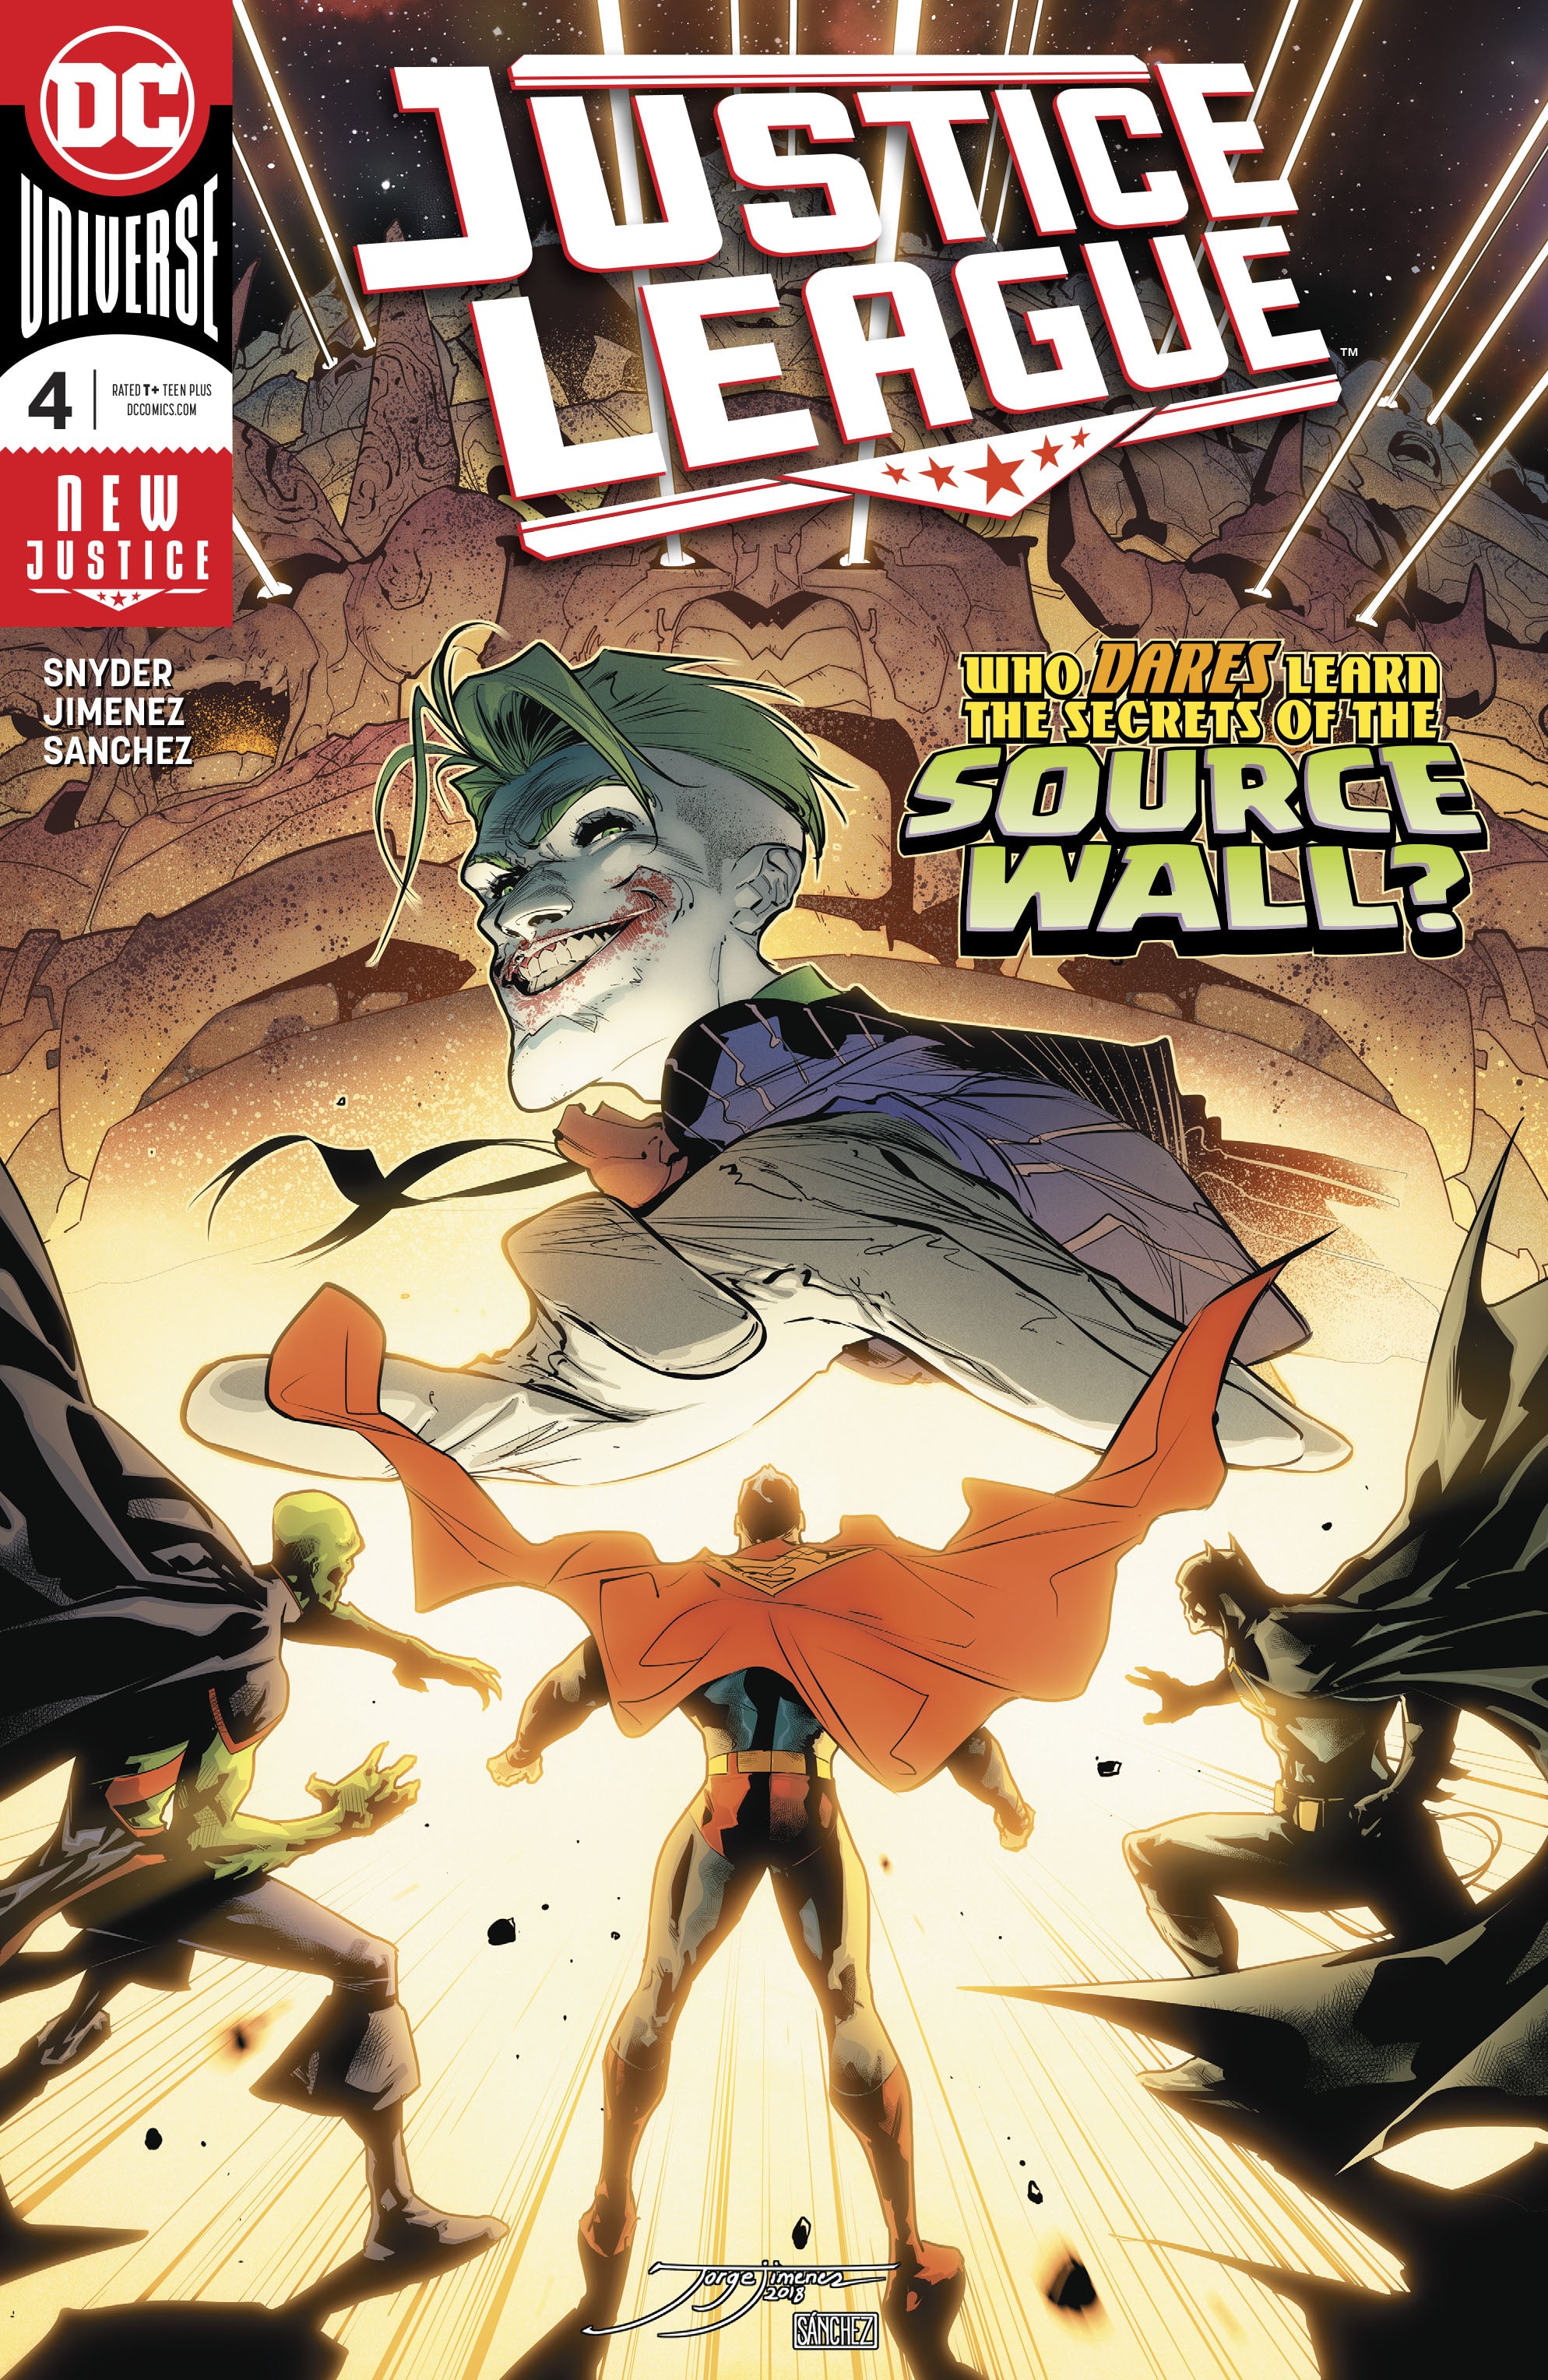 JUSTICE LEAGUE #4 | Game Master's Emporium (The New GME)